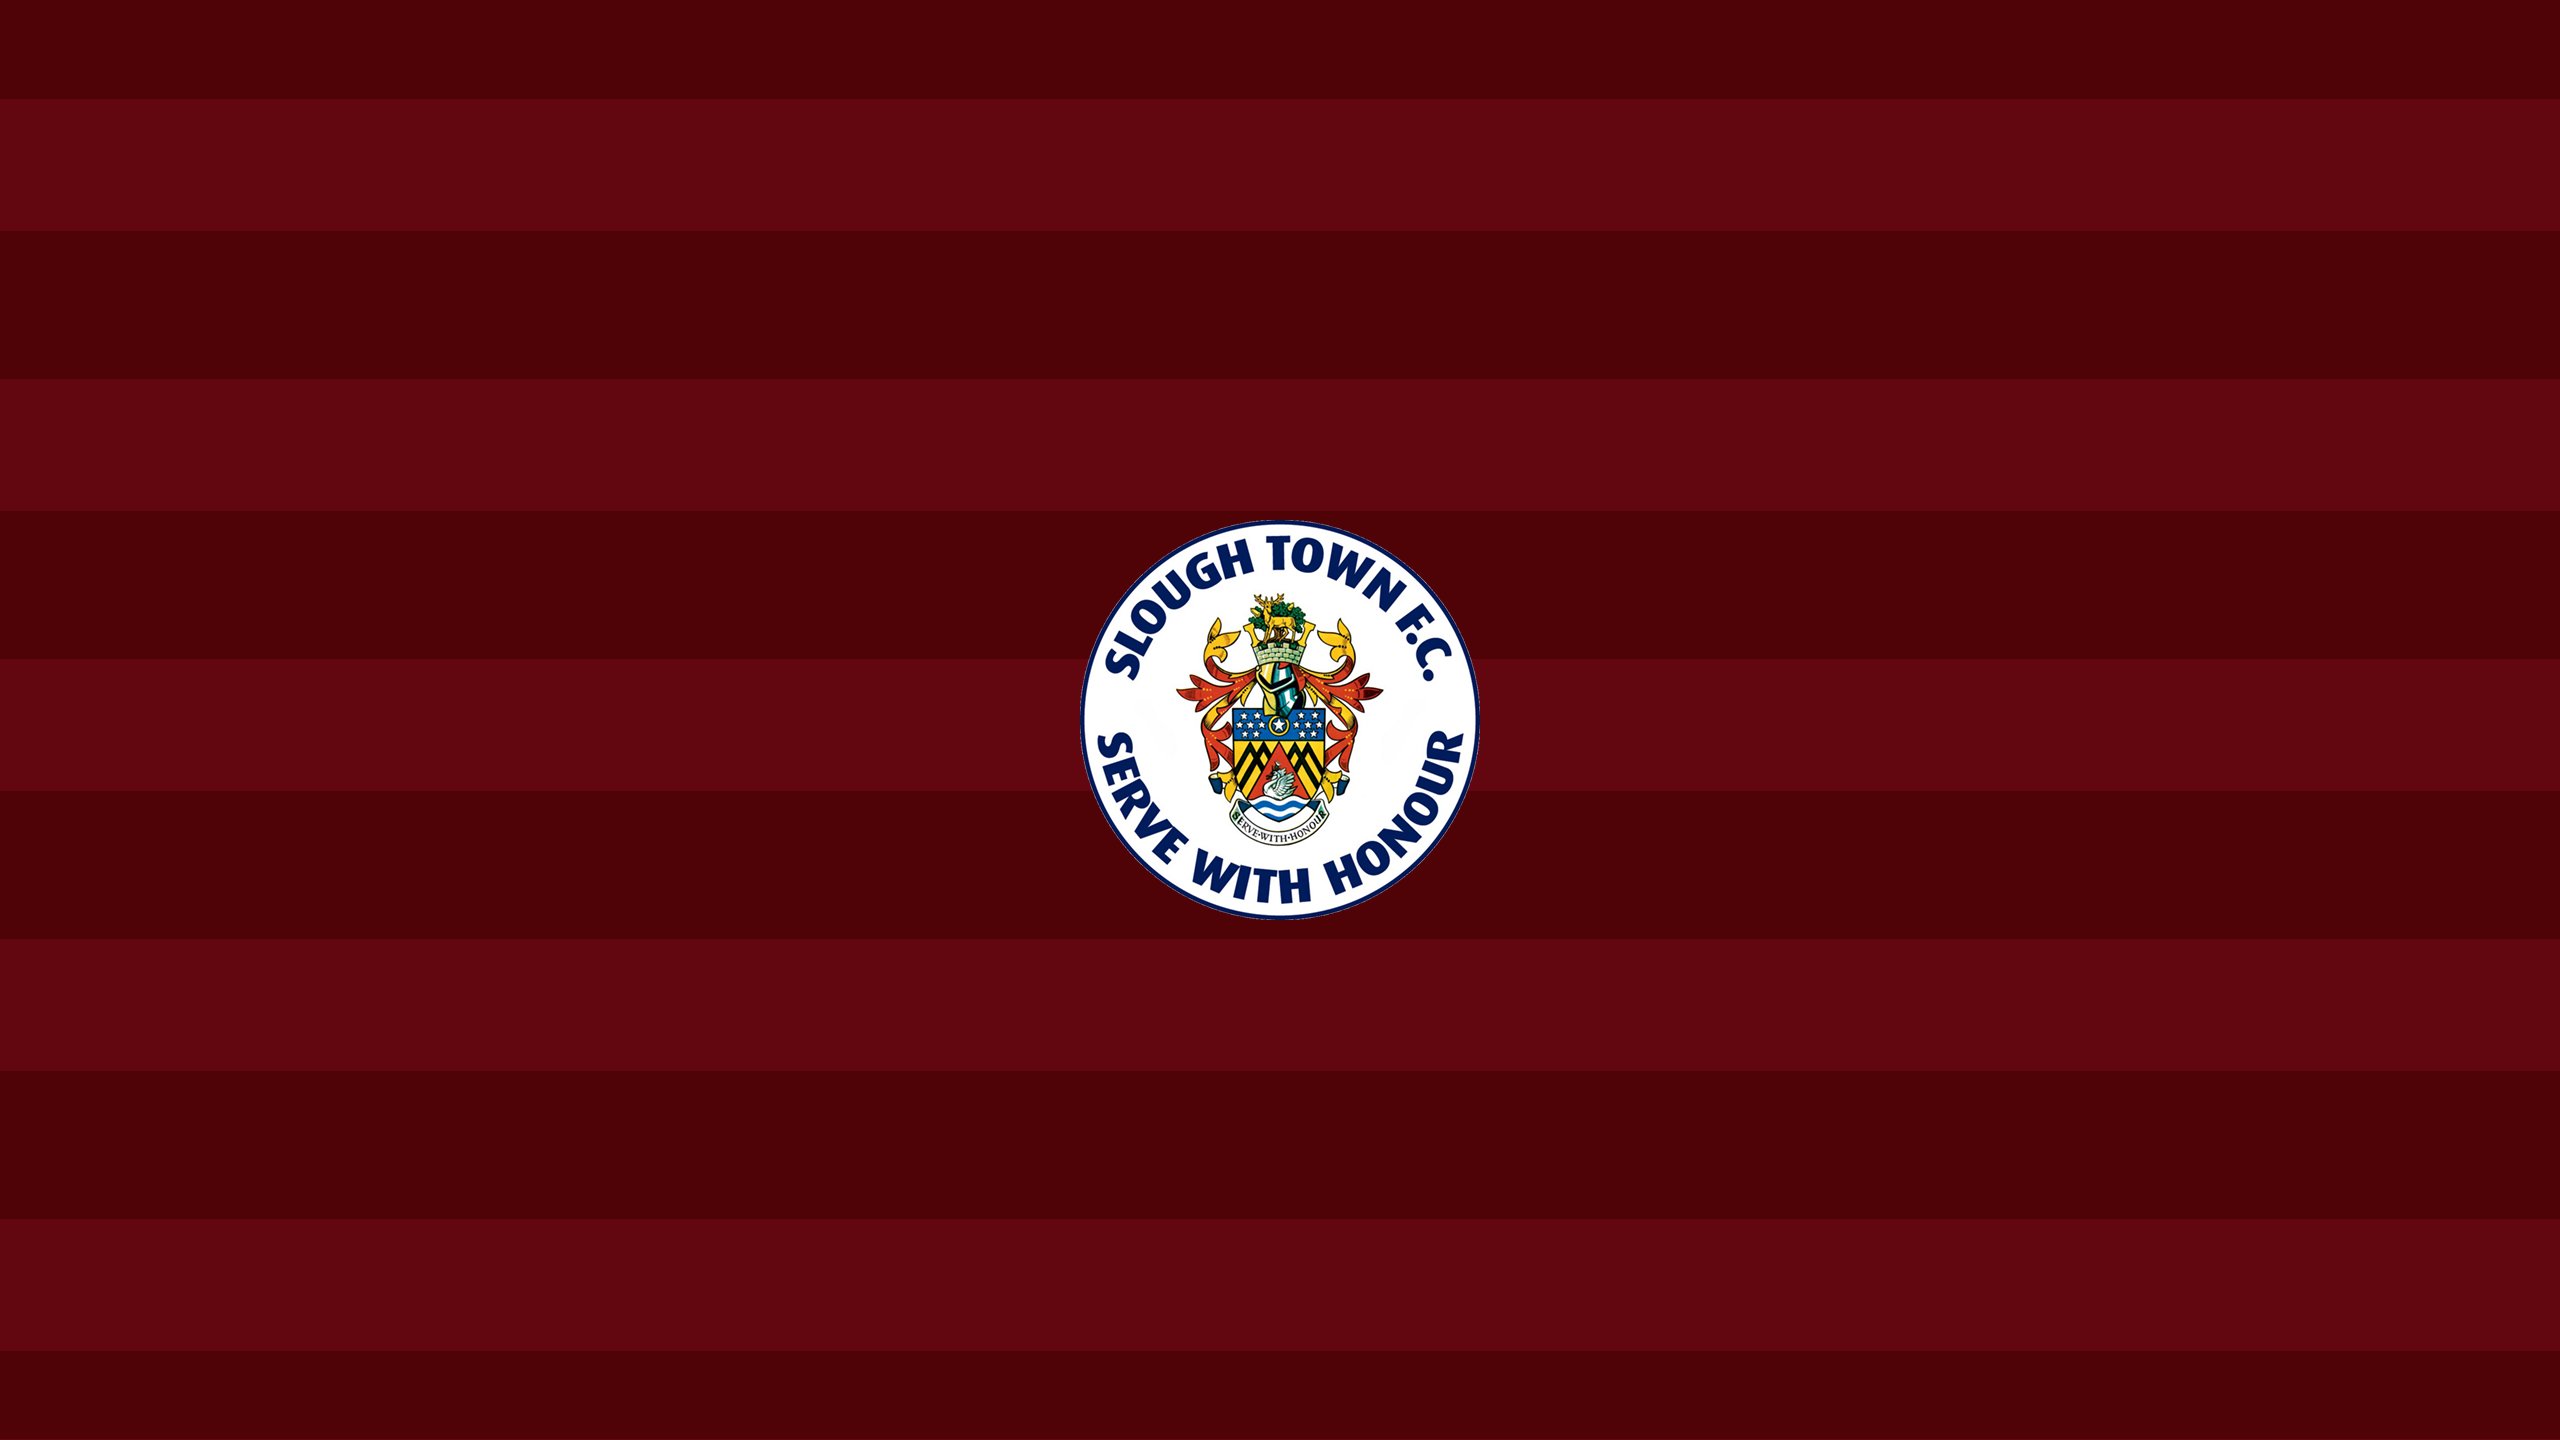 Slough Town F.C. Wallpapers